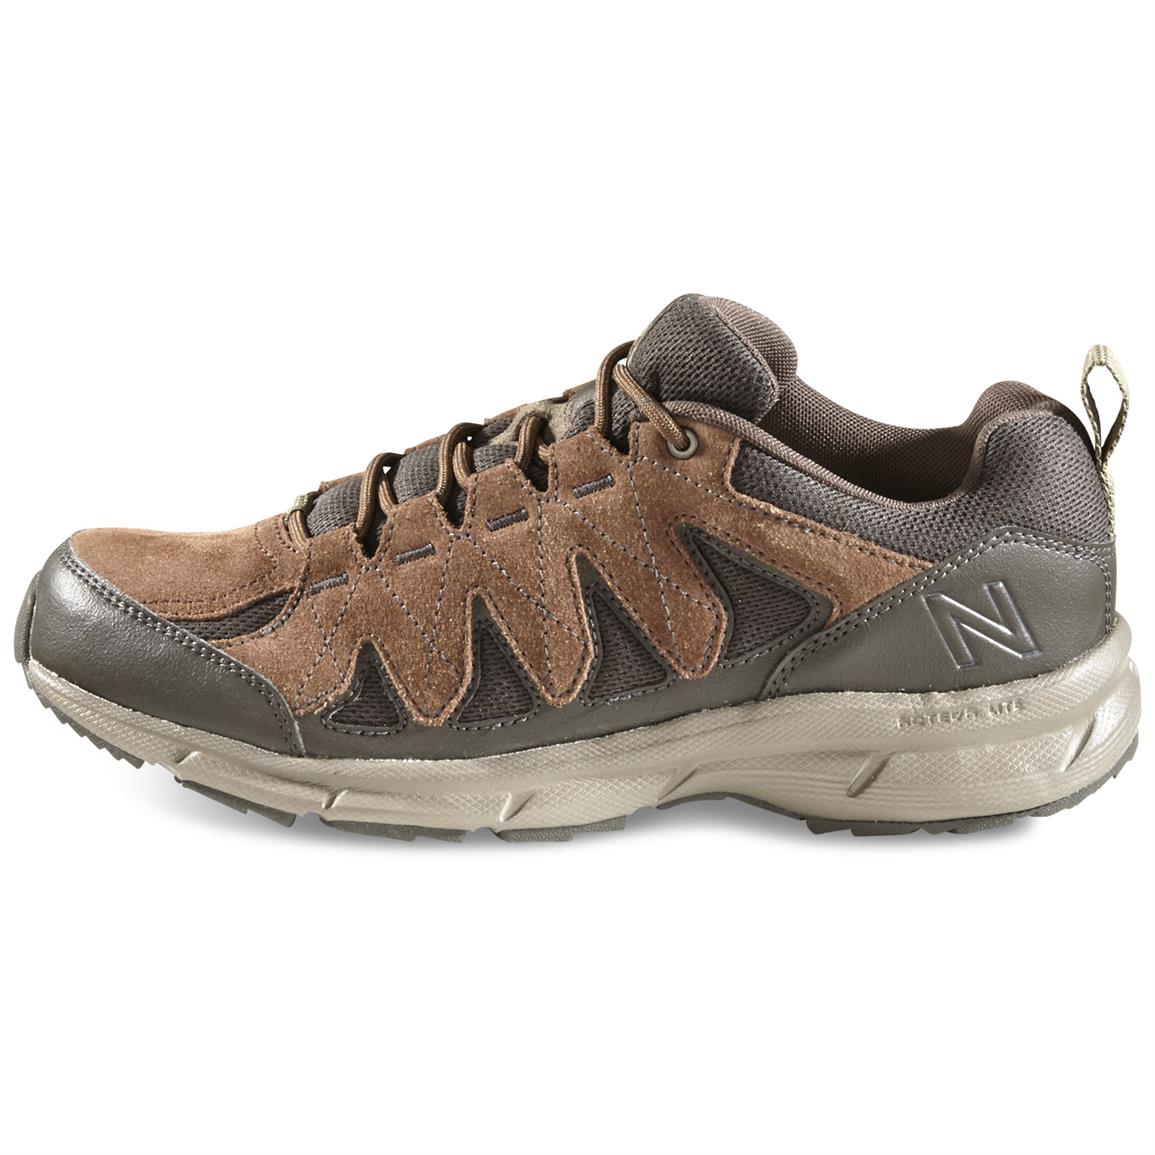 New Balance Men's MW799 Trail Walking Shoes - 665324, Casual Shoes at ...